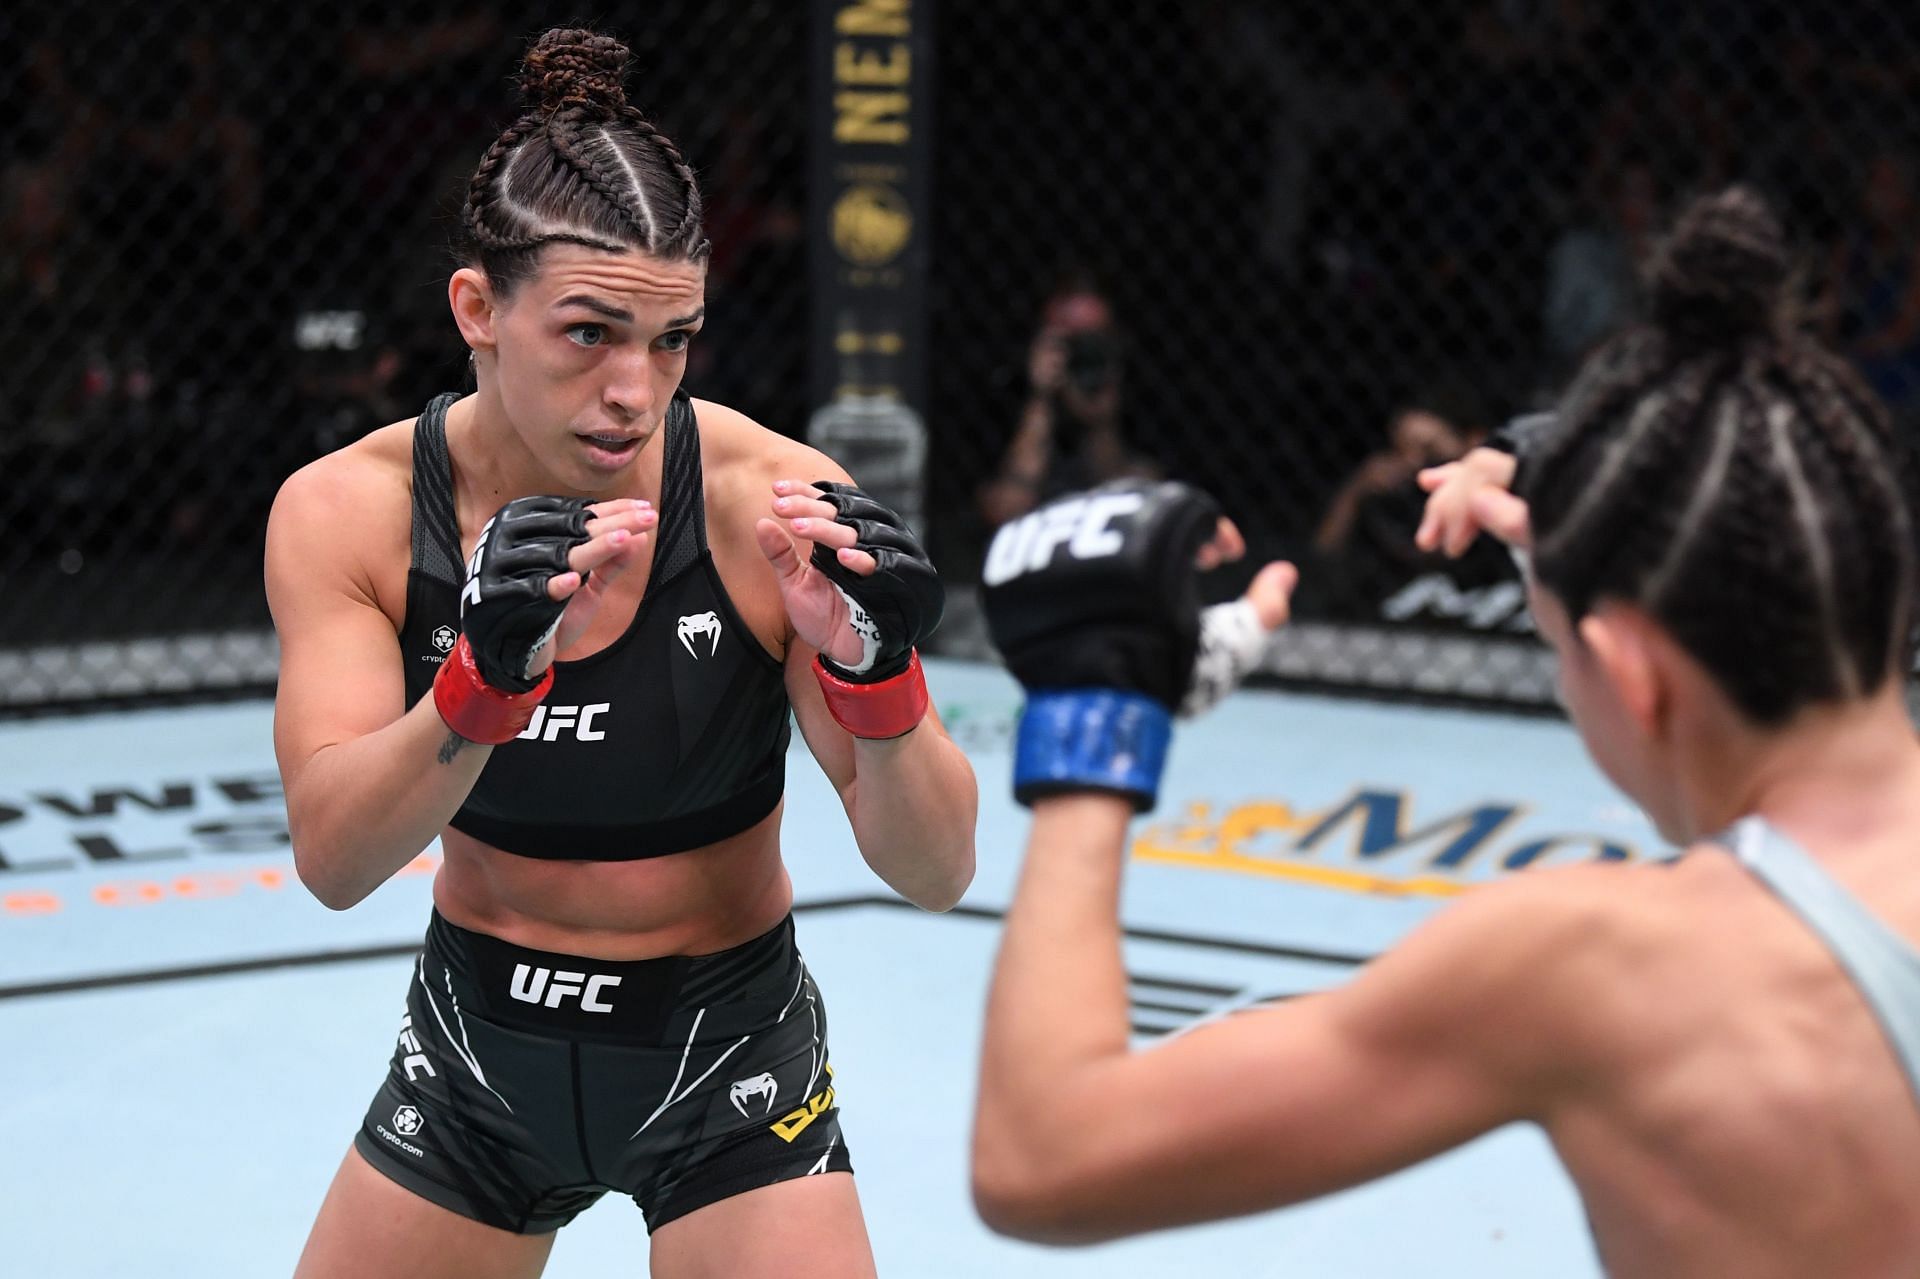 Mackenzie Dern will be hoping to pull off a big win over Tecia Torres this weekend